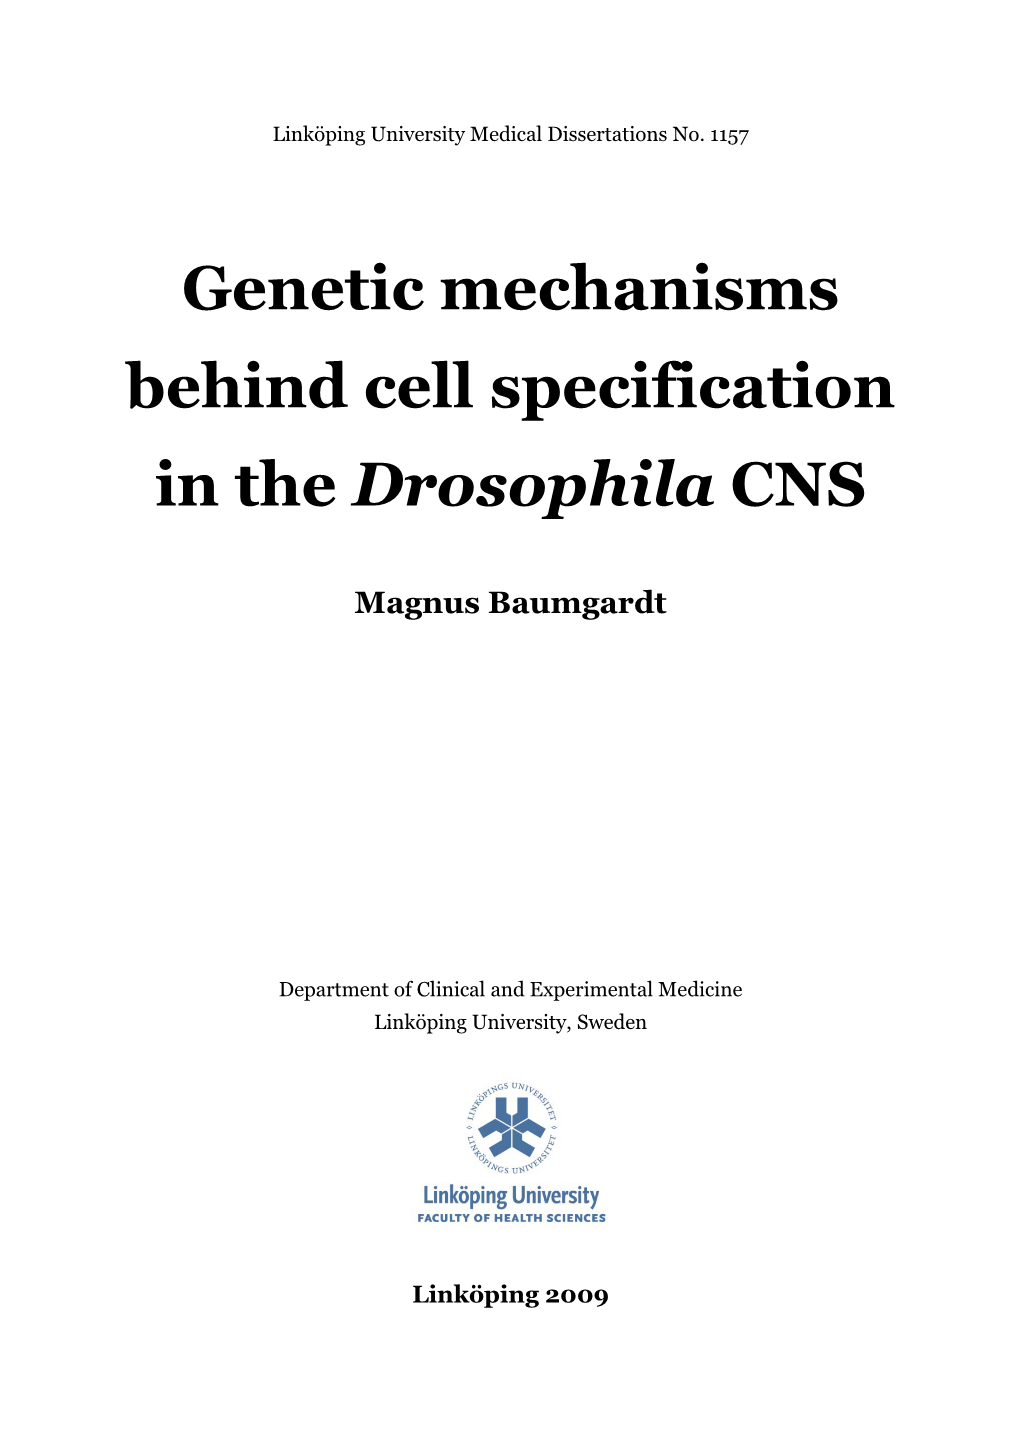 Genetic Mechanisms Behind Cell Specification in the Drosophila CNS